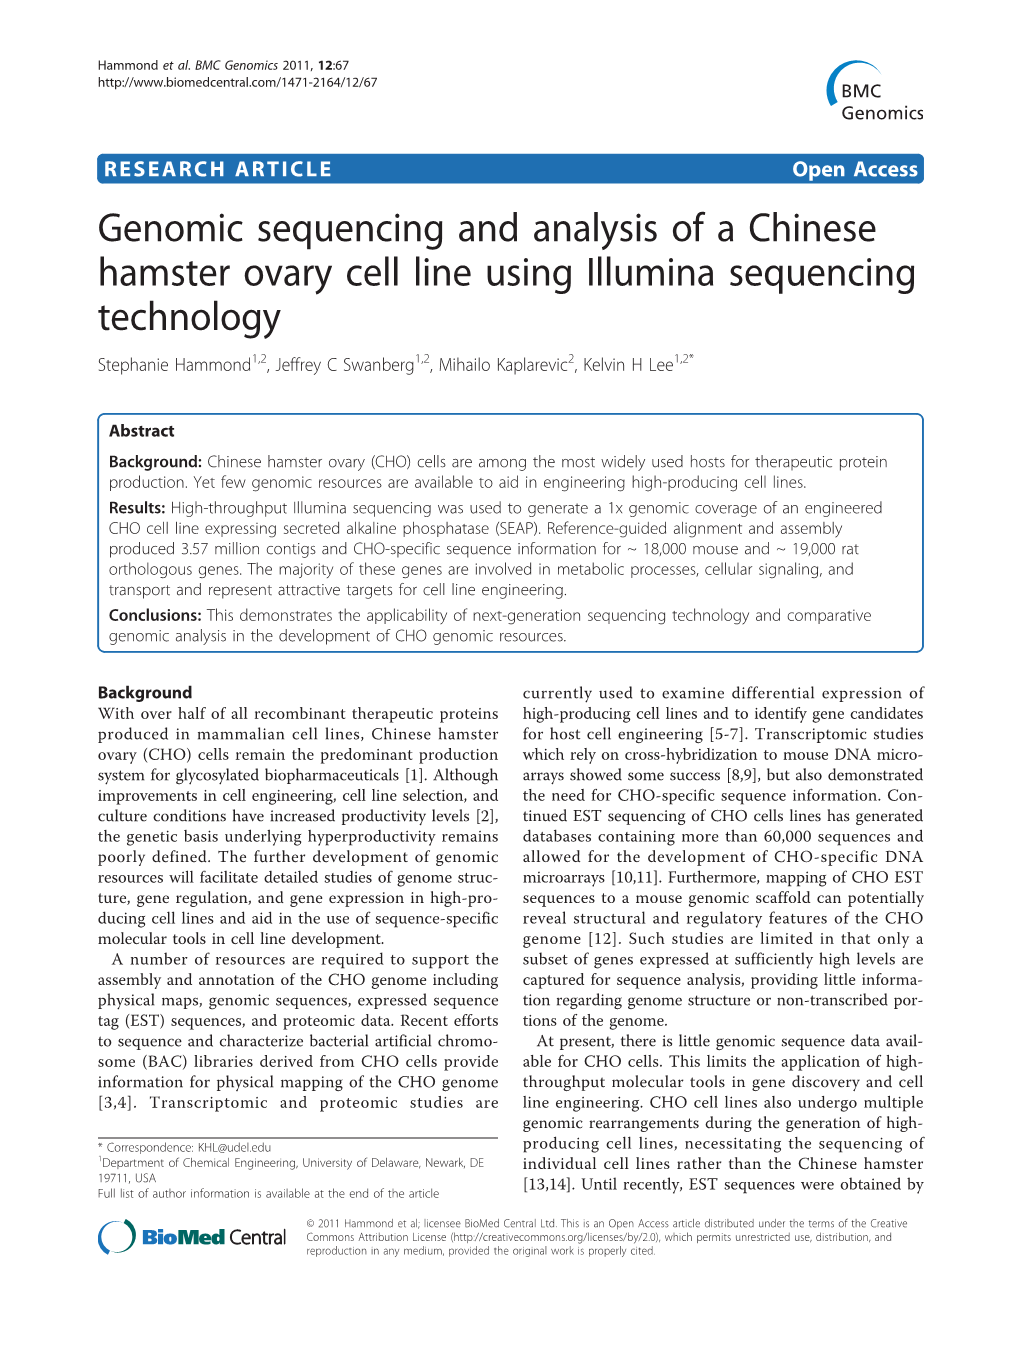 Genomic Sequencing and Analysis of a Chinese Hamster Ovary Cell Line